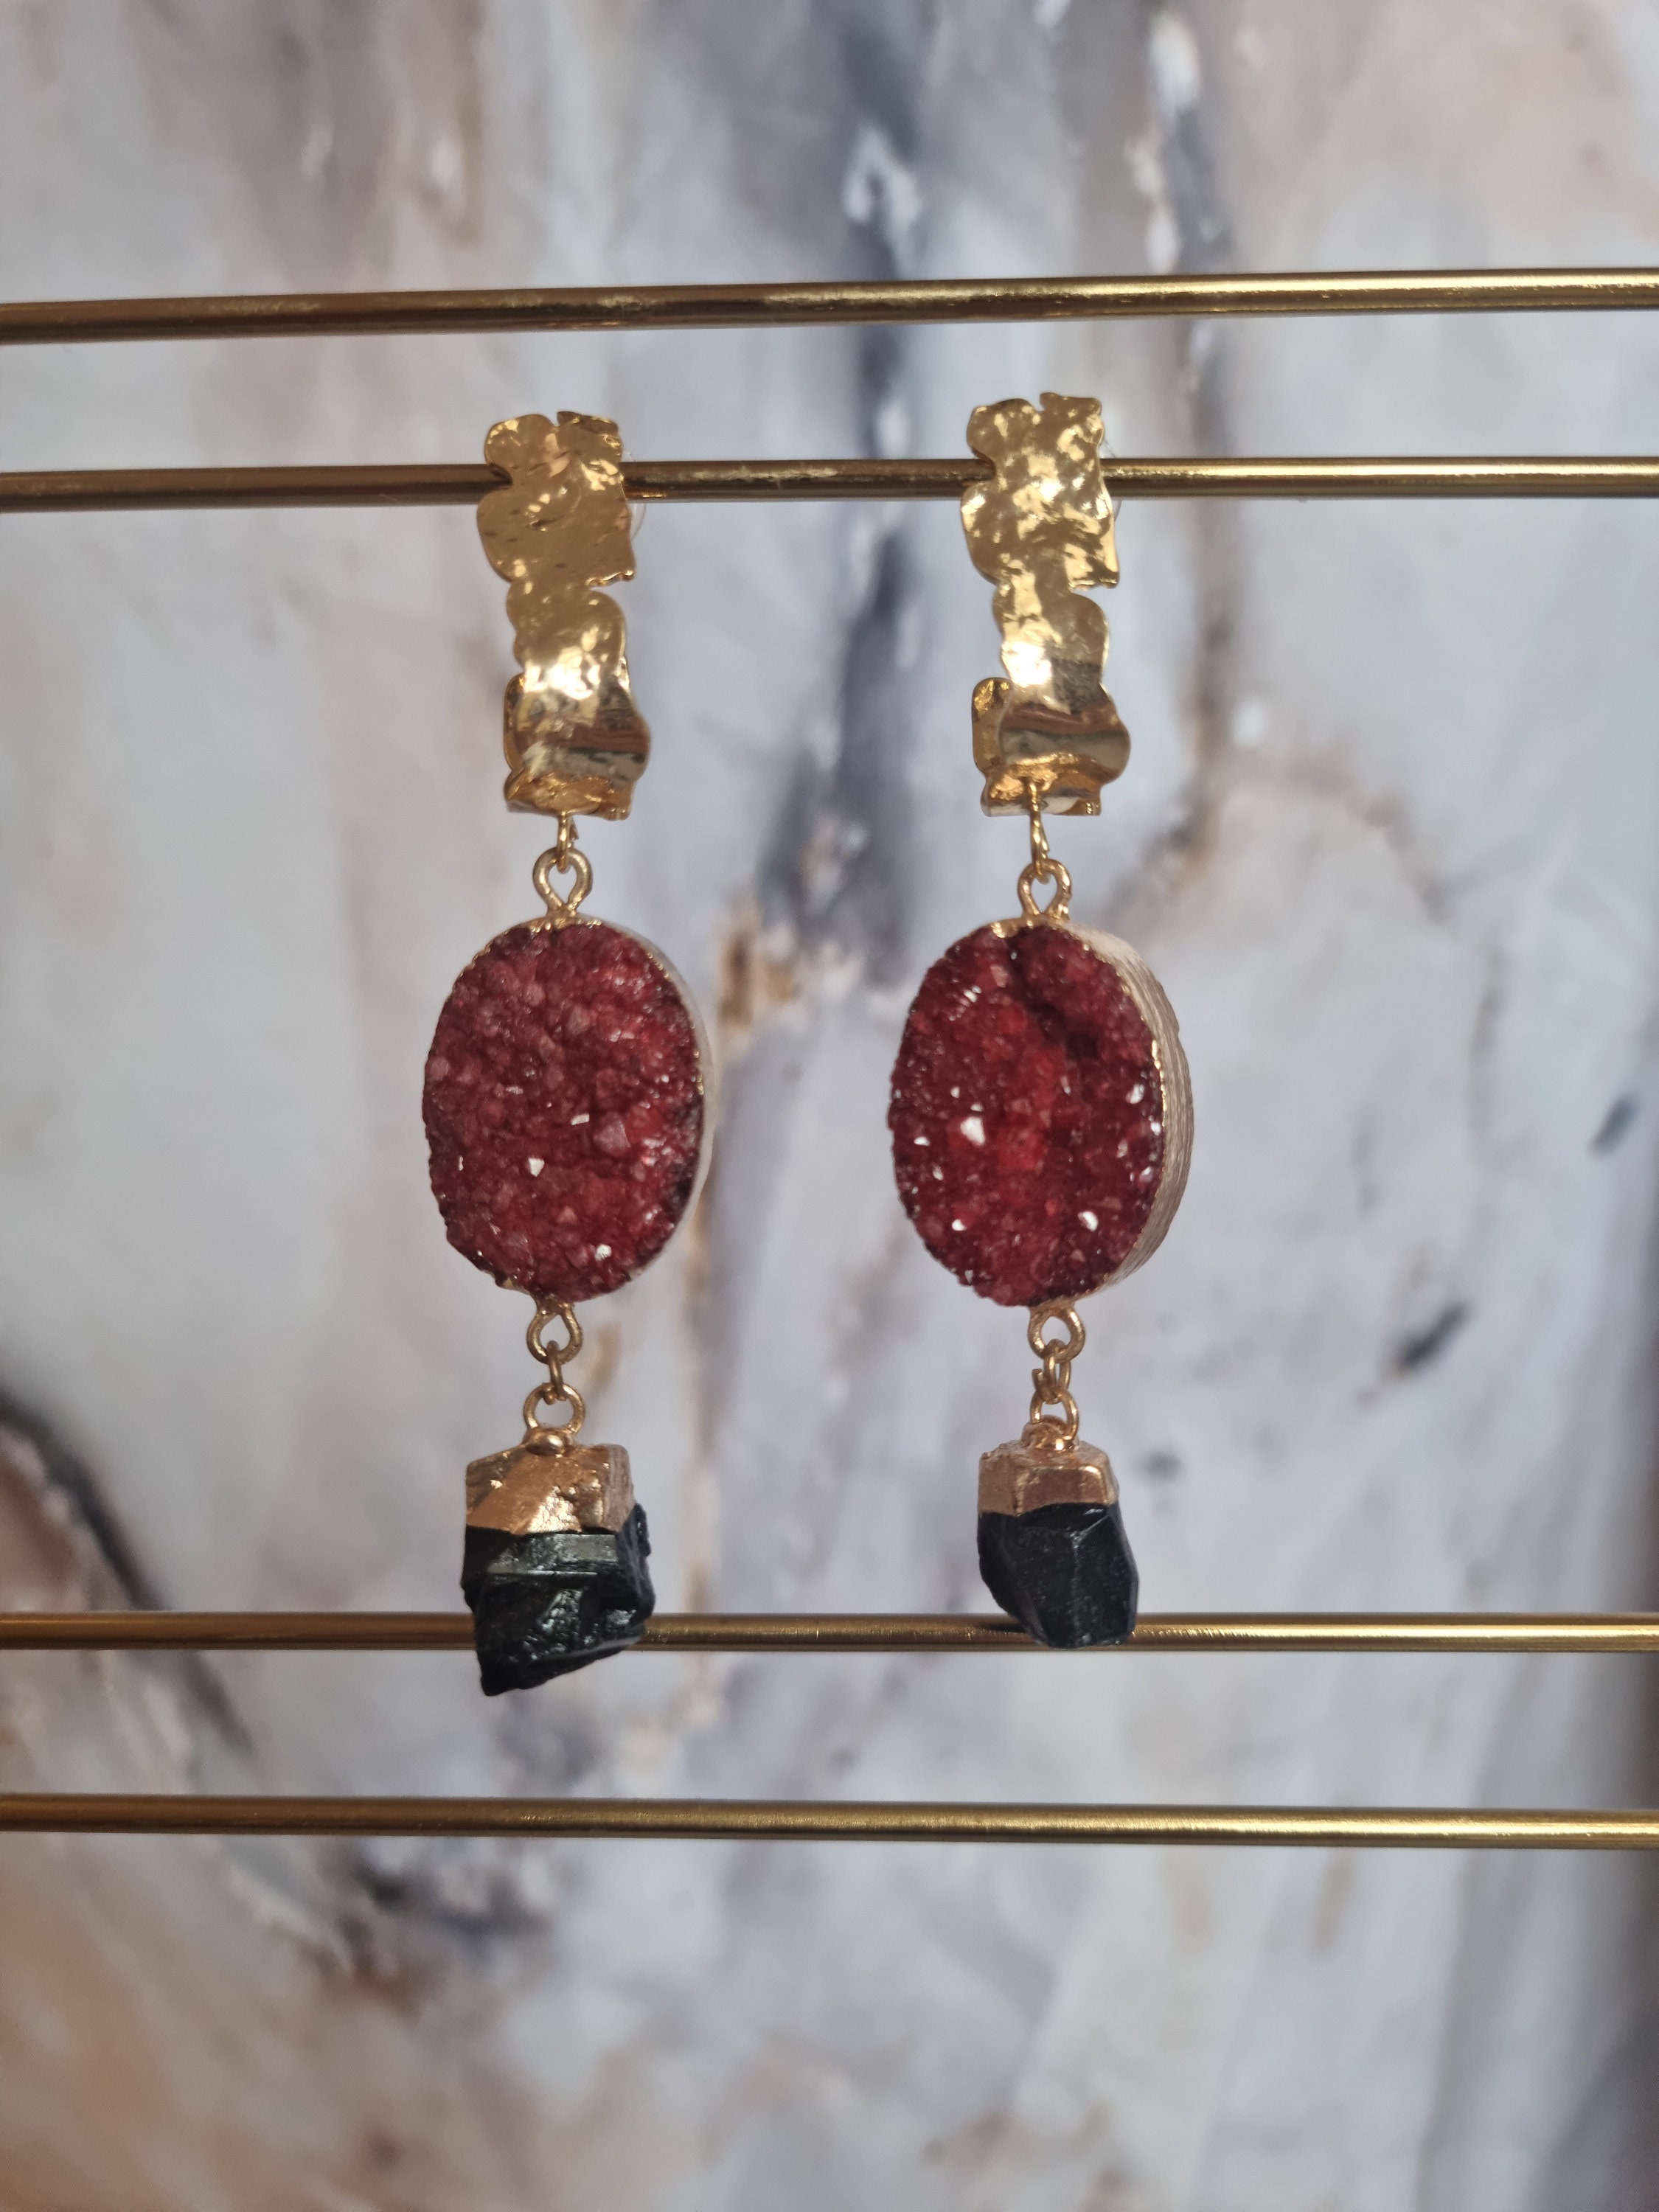  8mm, 10mm or 12mm Red Merlot Wine Crystal Faux Druzy Earrings -  Titanium or Surgical Stainless Steel Posts Nickel Free for Sensitive Ears  Deep Scarlet Small Studs : Handmade Products